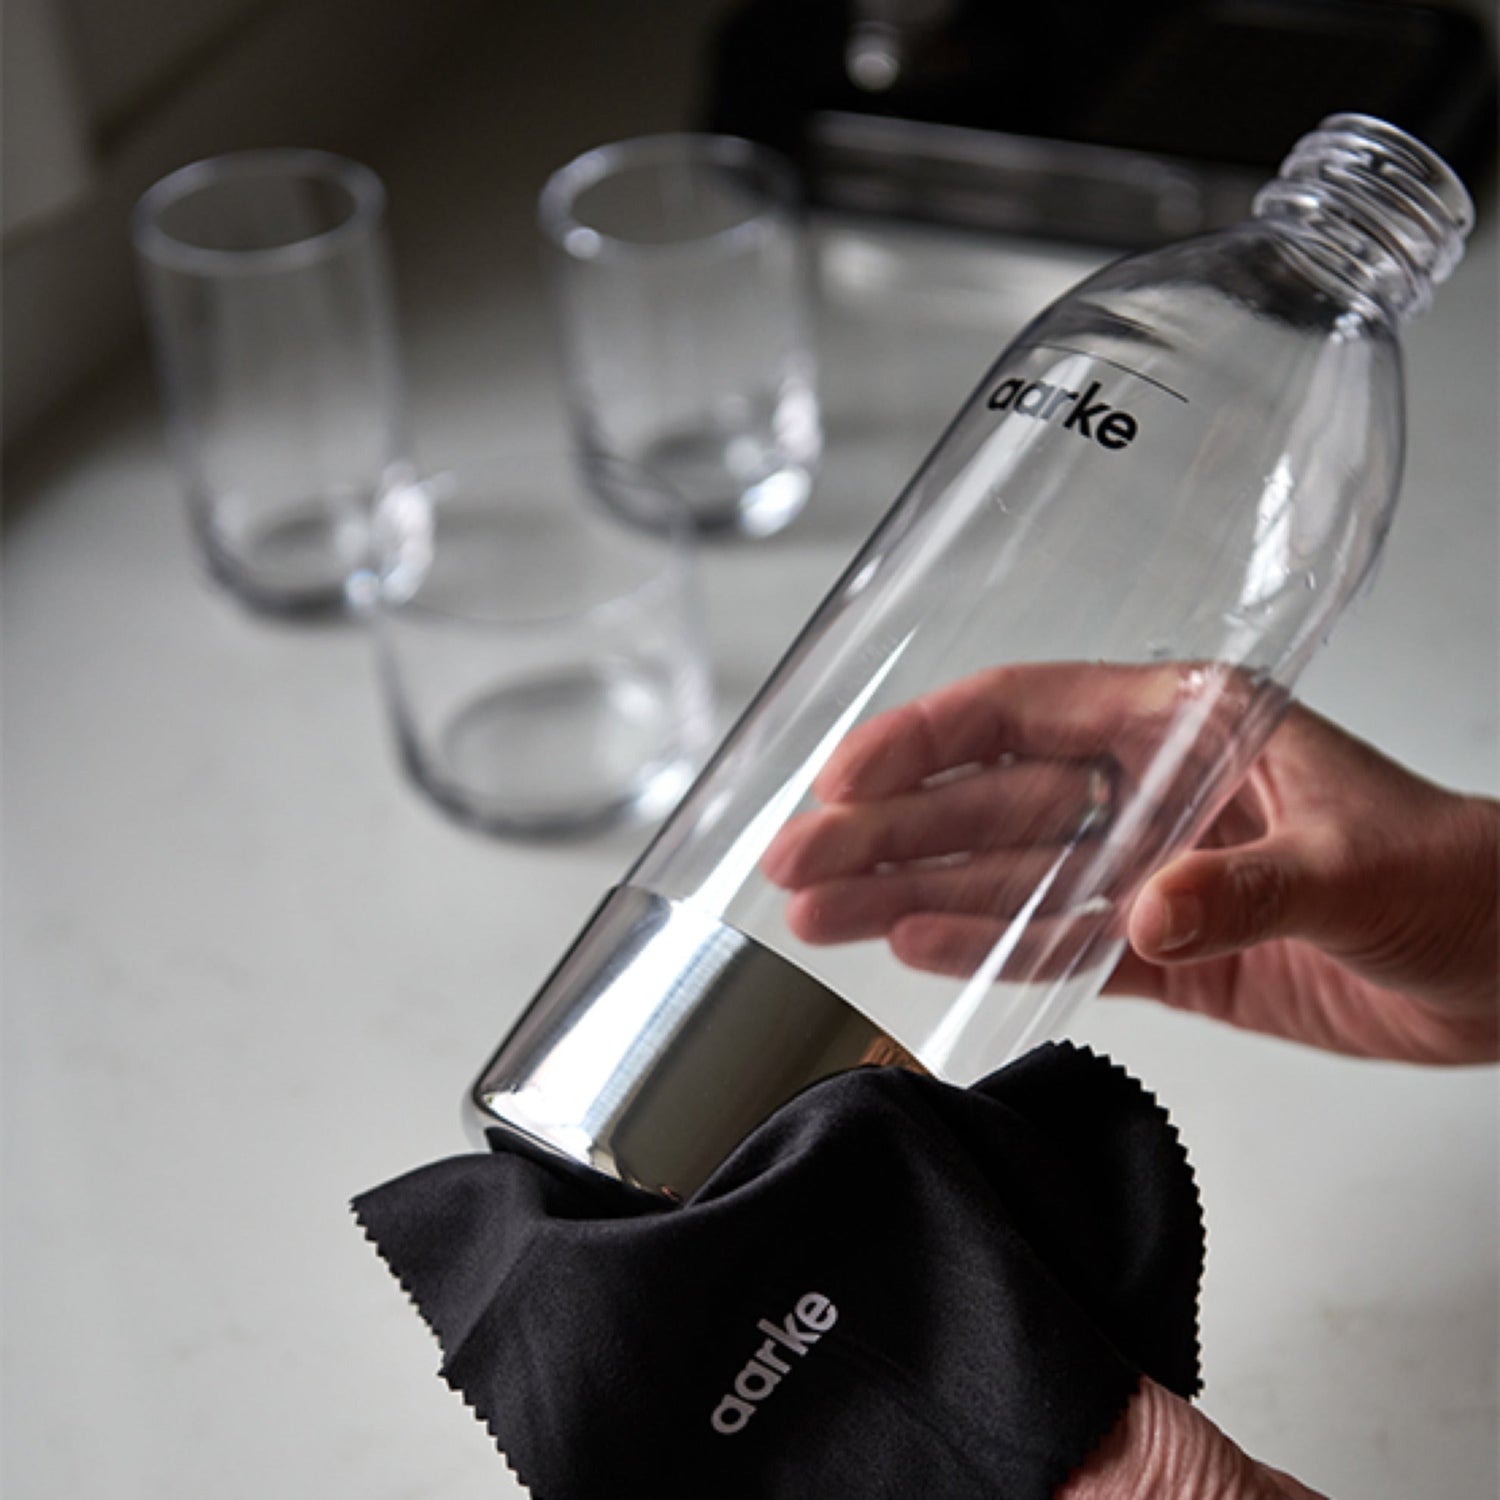 A person wipes the Aarke PET Bottle clean with a cloth.